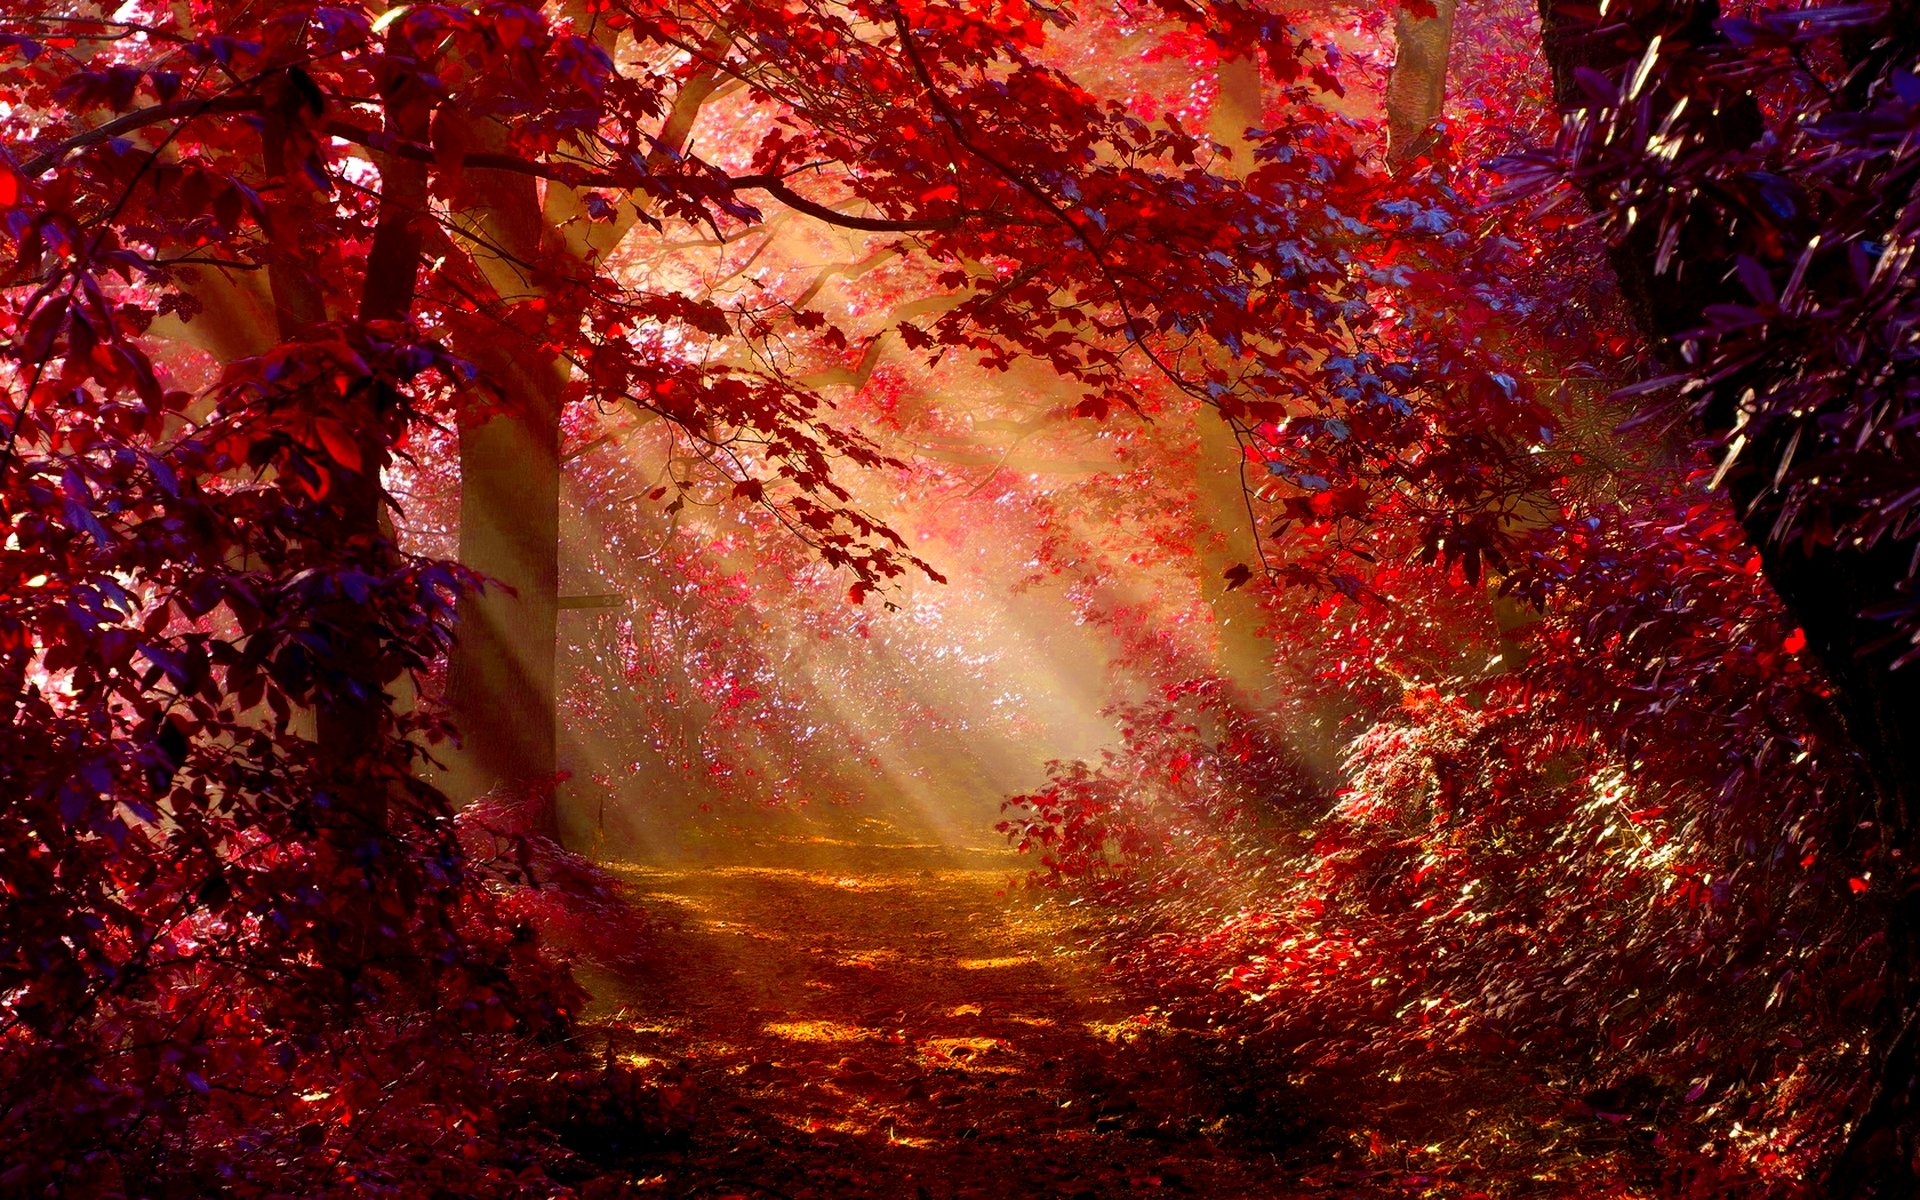 Sunbeams in an autumn forest with red foliage